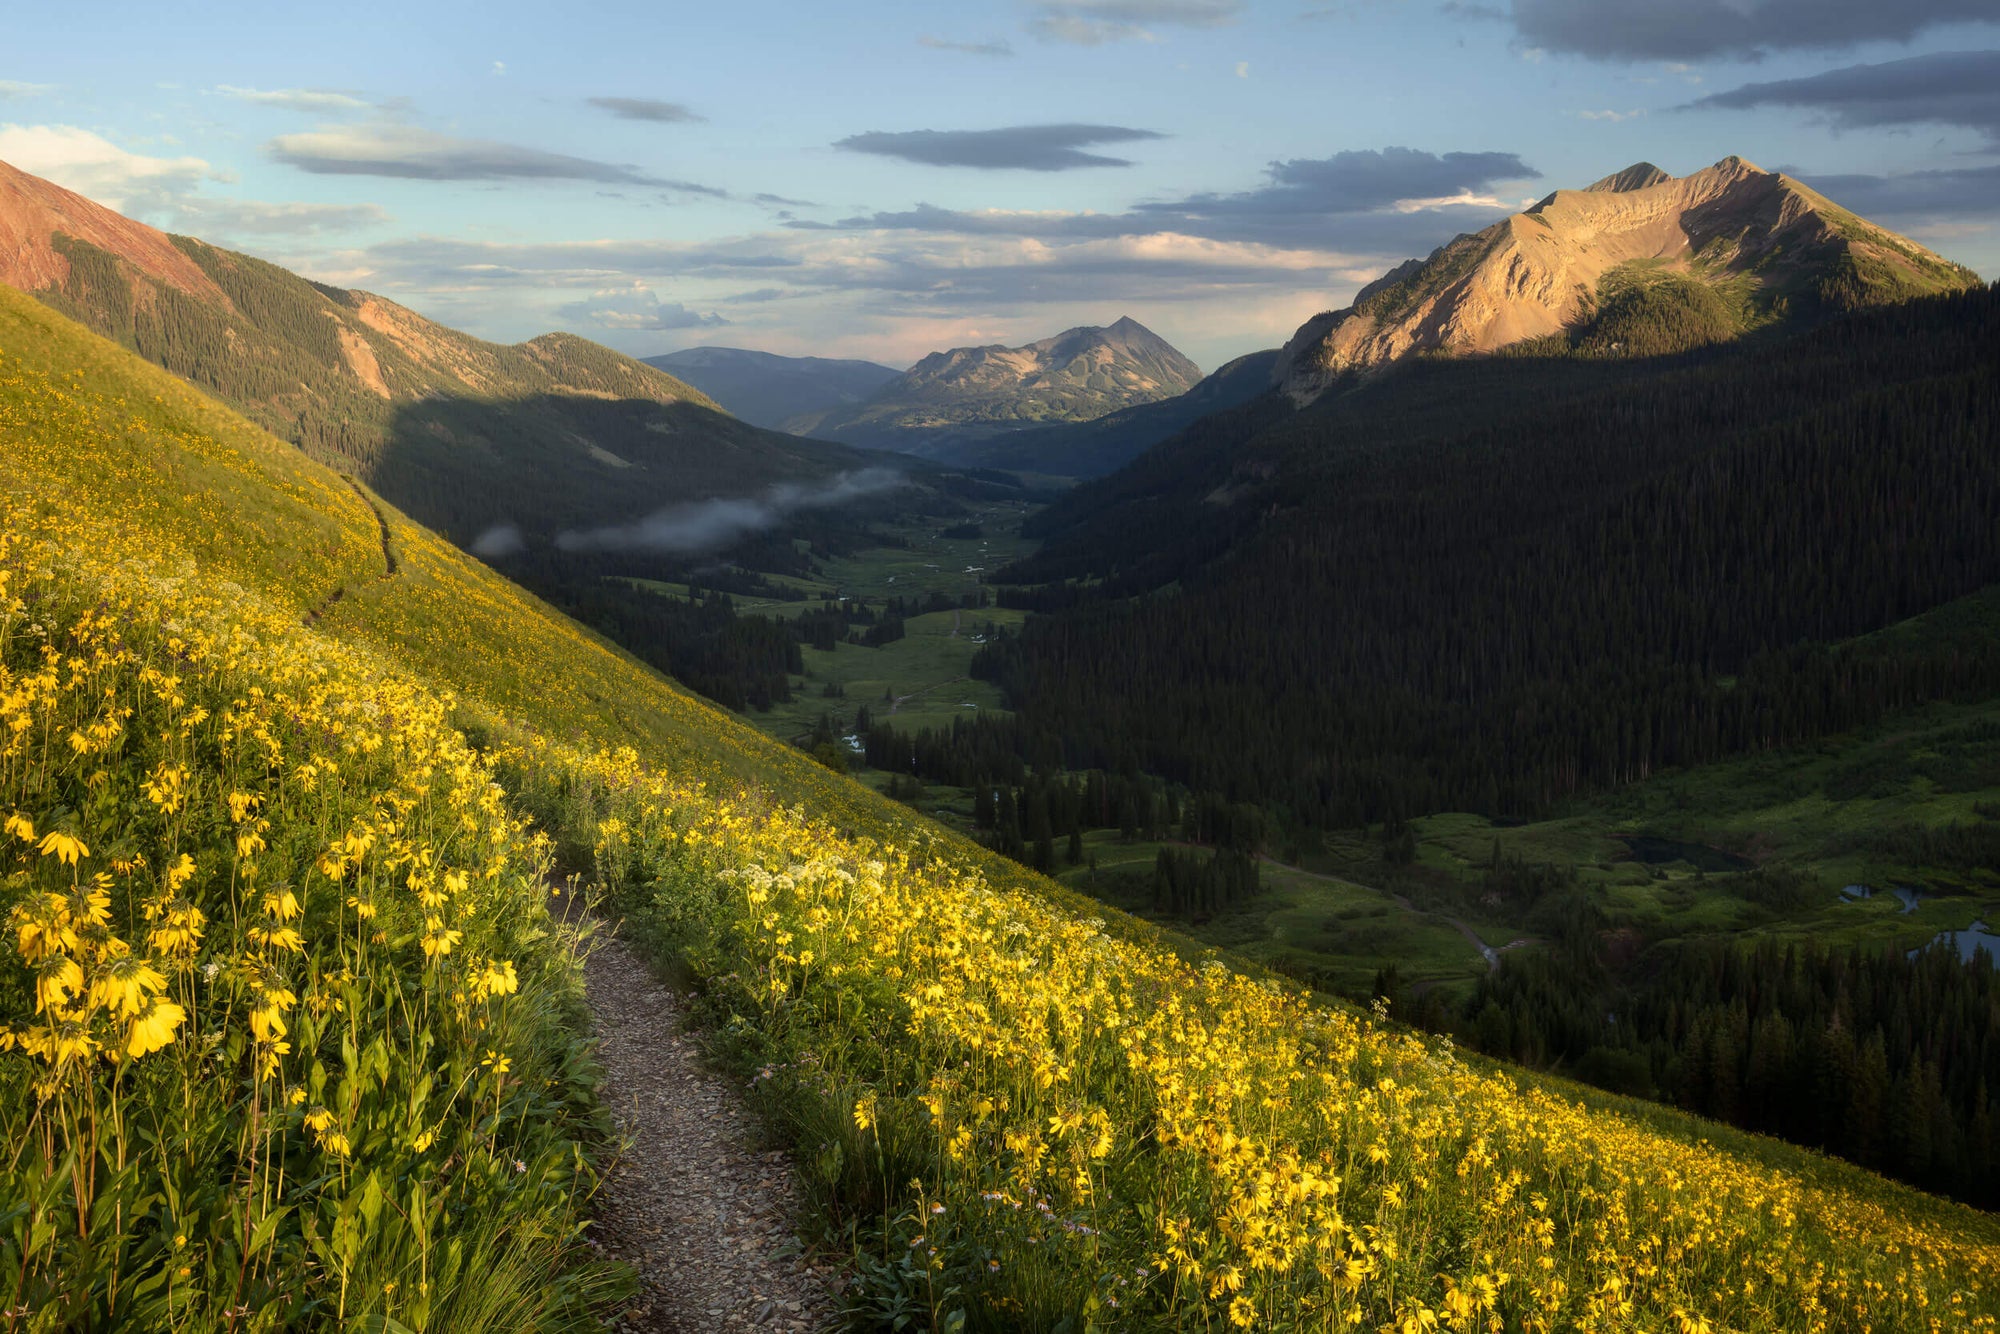 A Crested Butte wildflower picture from a popular hiking trail.